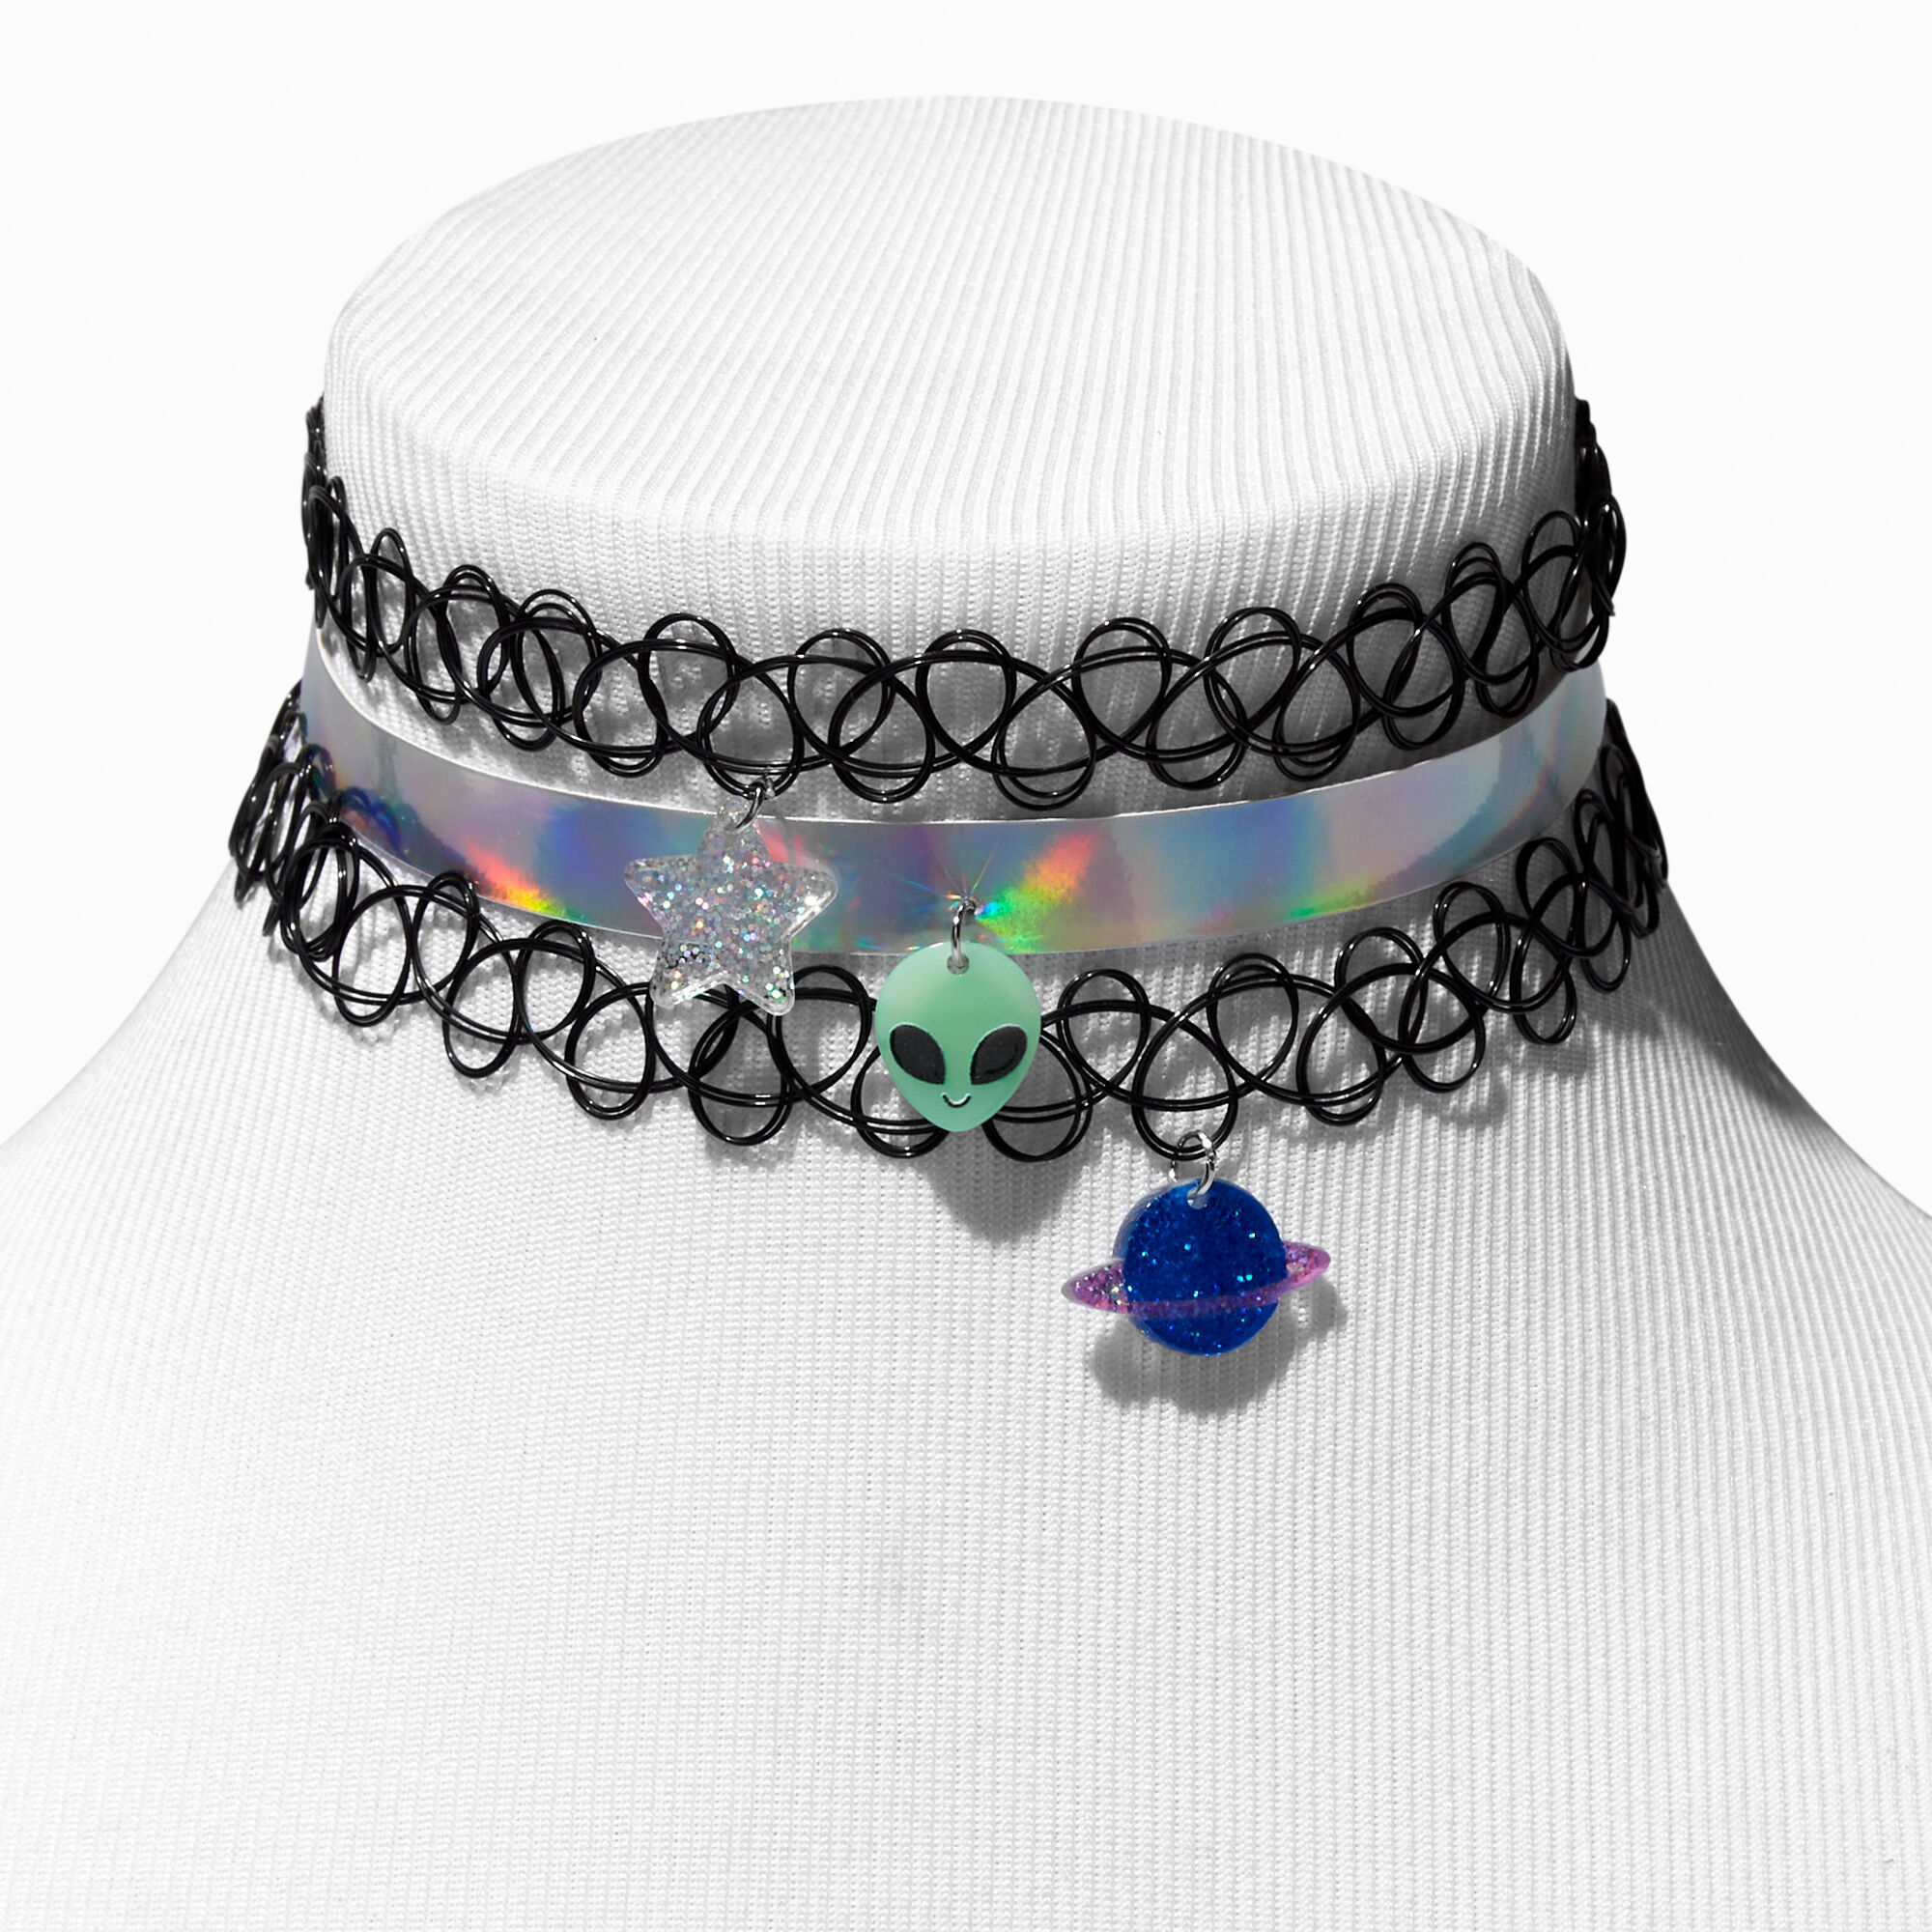 Celestial Glow In The Dark Black Tattoo Choker Necklaces - 3 Pack |  Claire's US